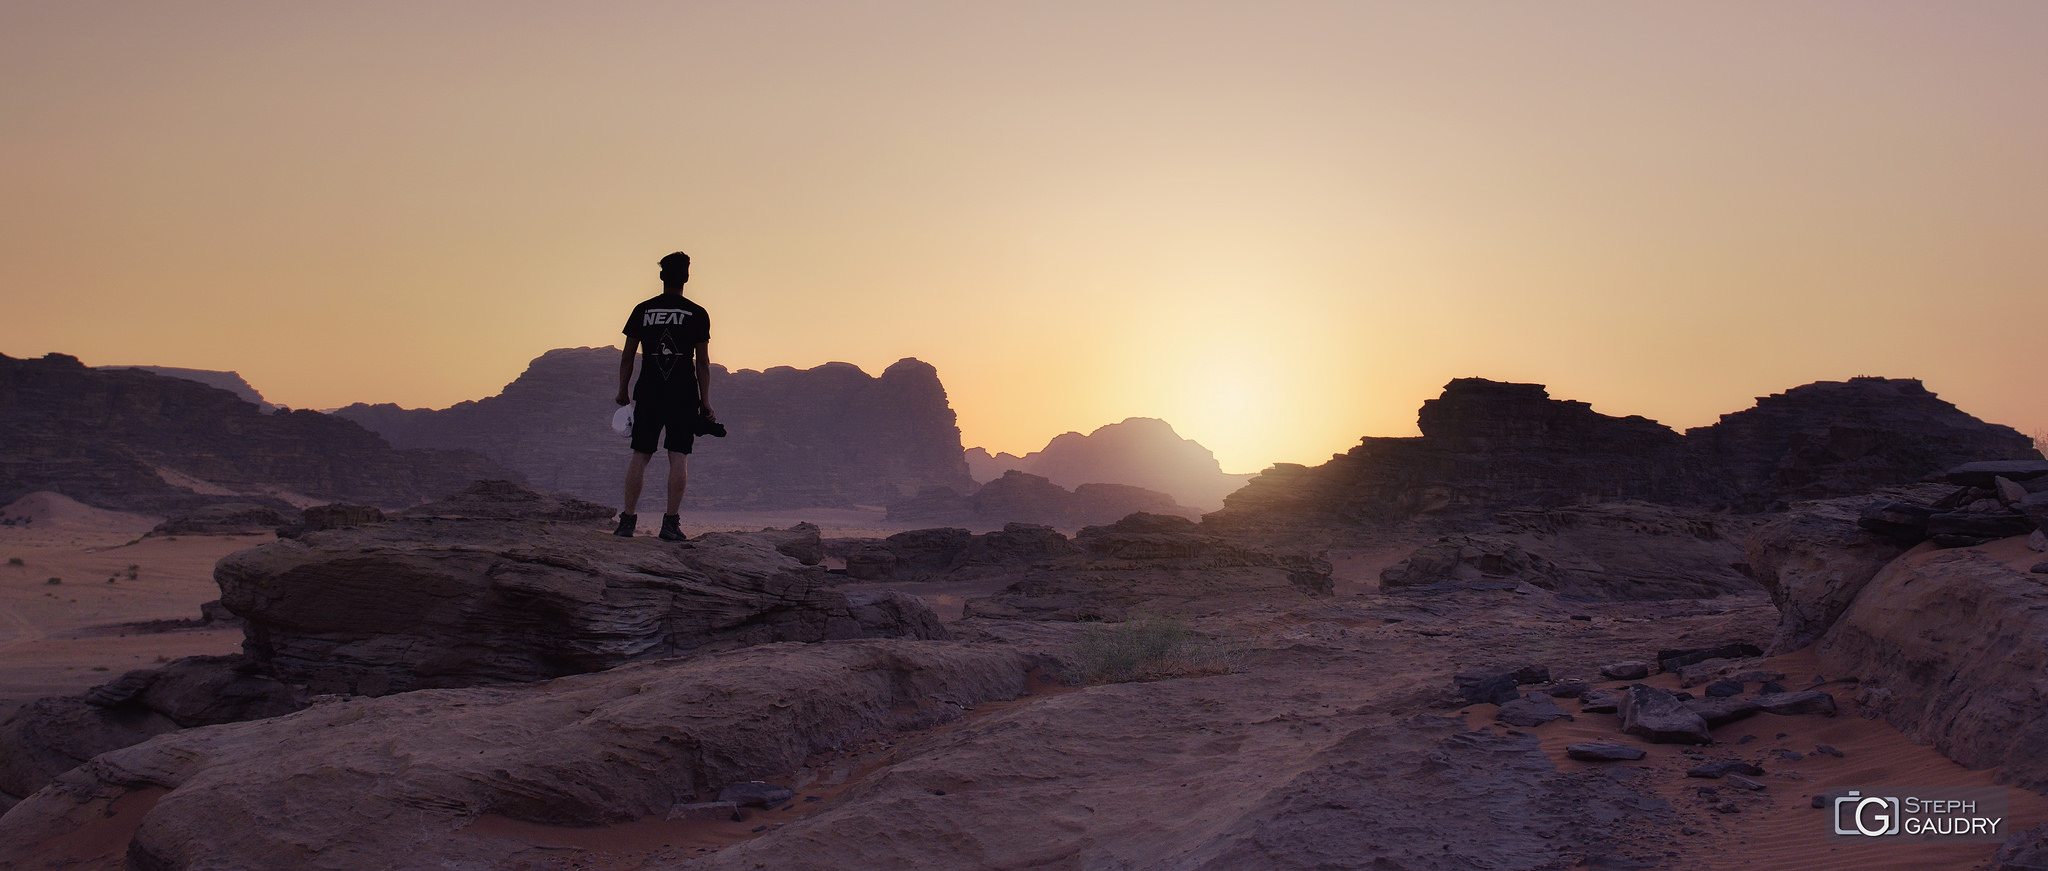 Ma sélection / Wadi-Rum, sunset in the desert - my son Tom